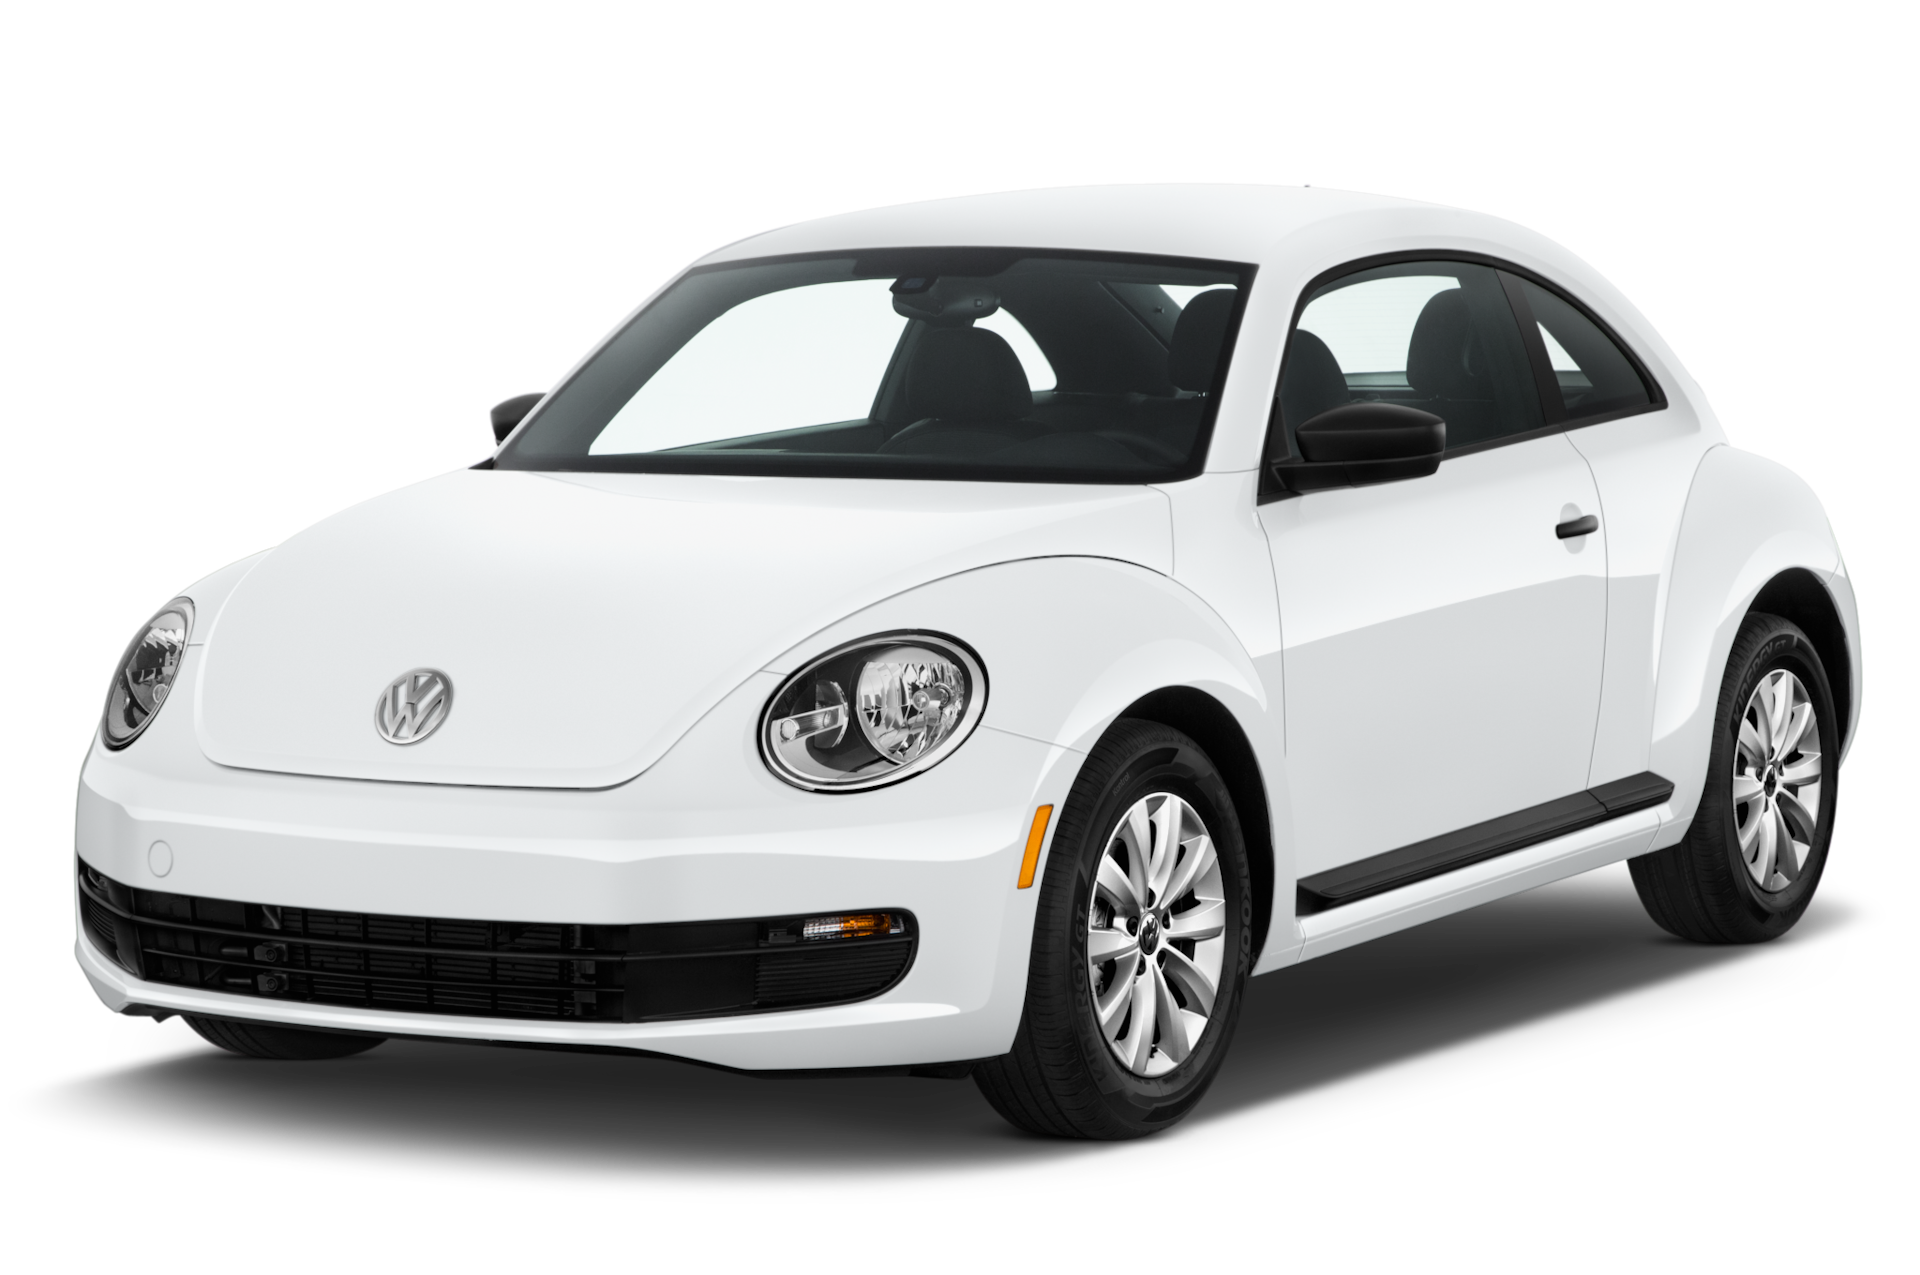 2016 Volkswagen Beetle Prices, Reviews, and Photos - MotorTrend